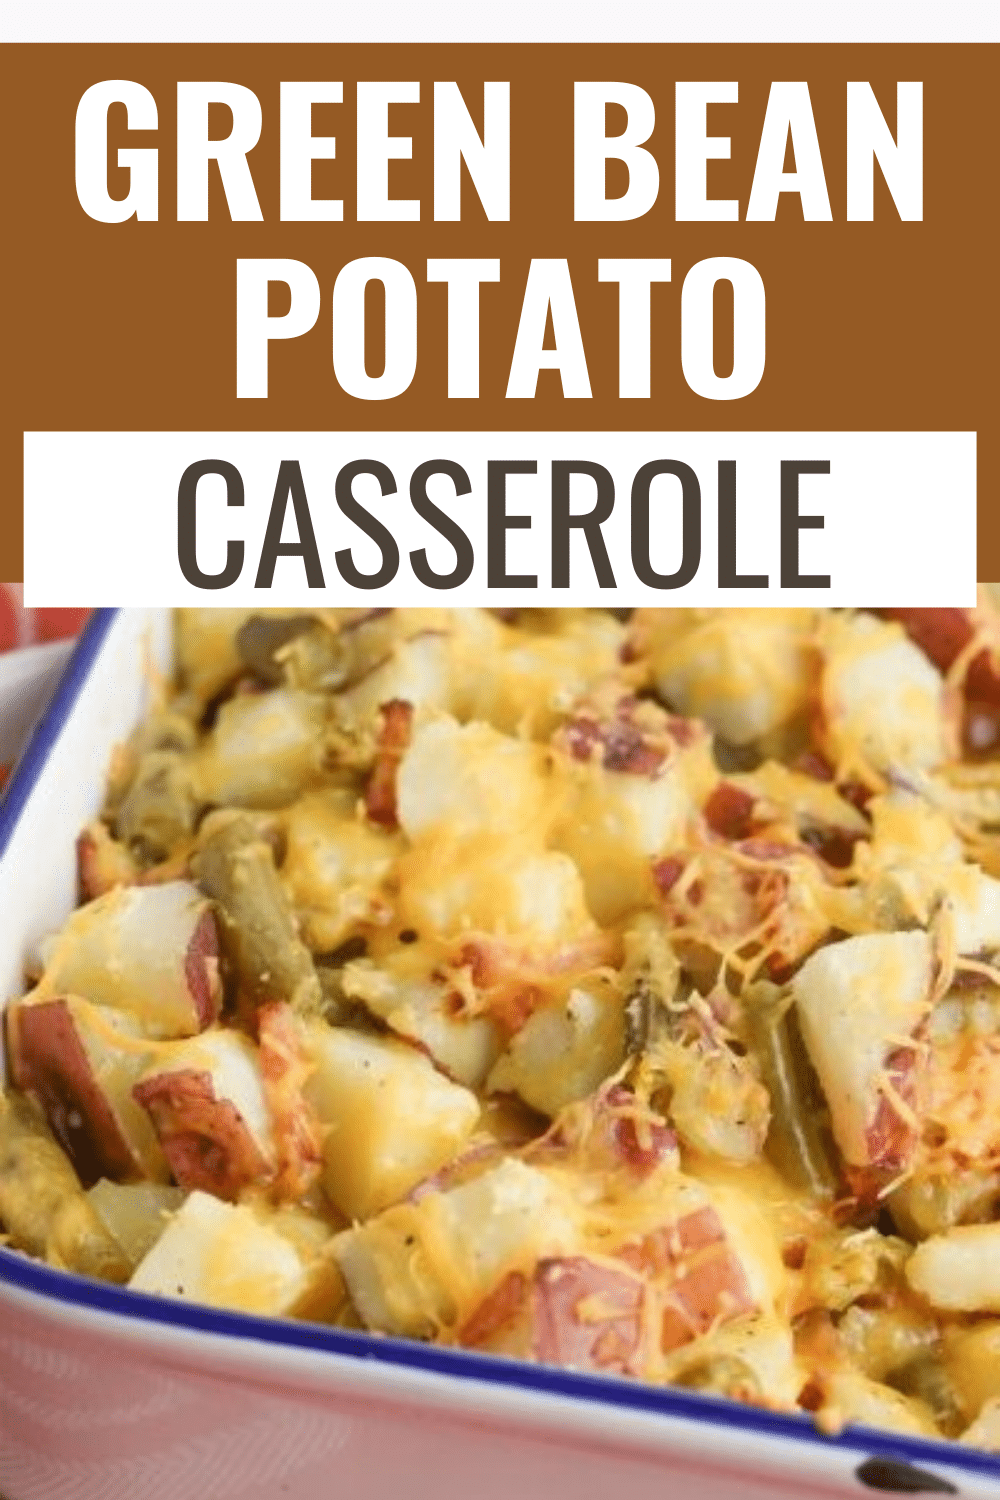 This green bean potato casserole can be a main dish or a side dish. Either way your family will love the flavors in this easy casserole recipe. #greenbeans #casseroles #greenbeancasserole via @wondermomwannab